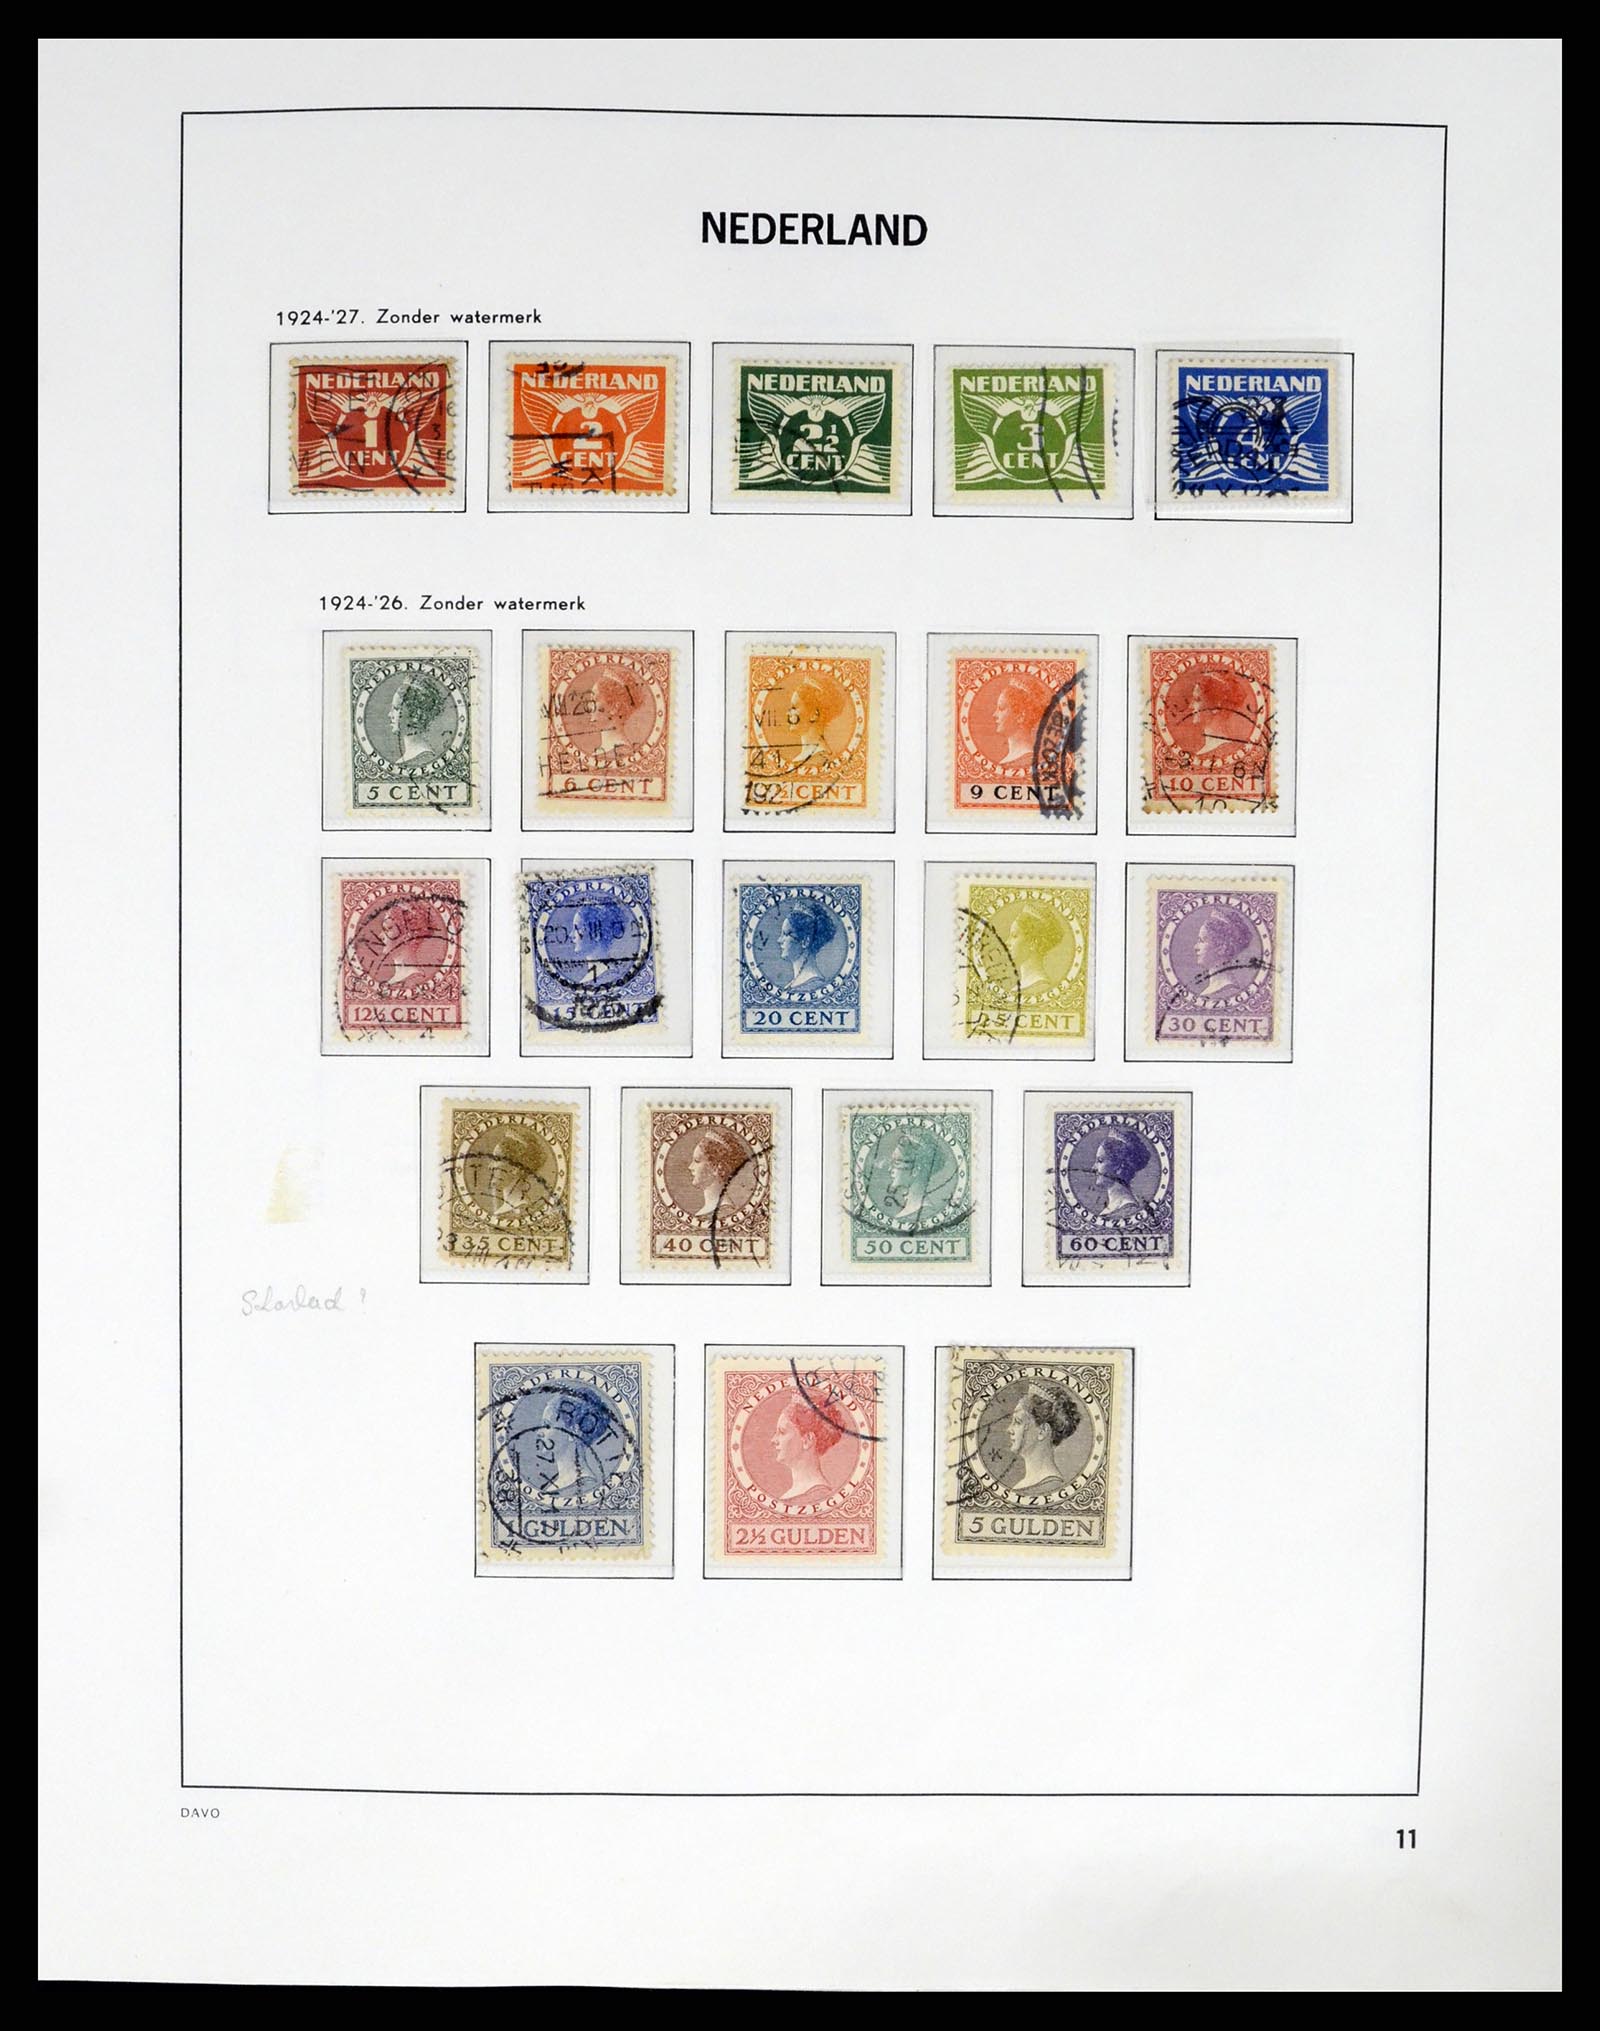 37294 011 - Stamp collection 37294 Netherlands 1852-2001.